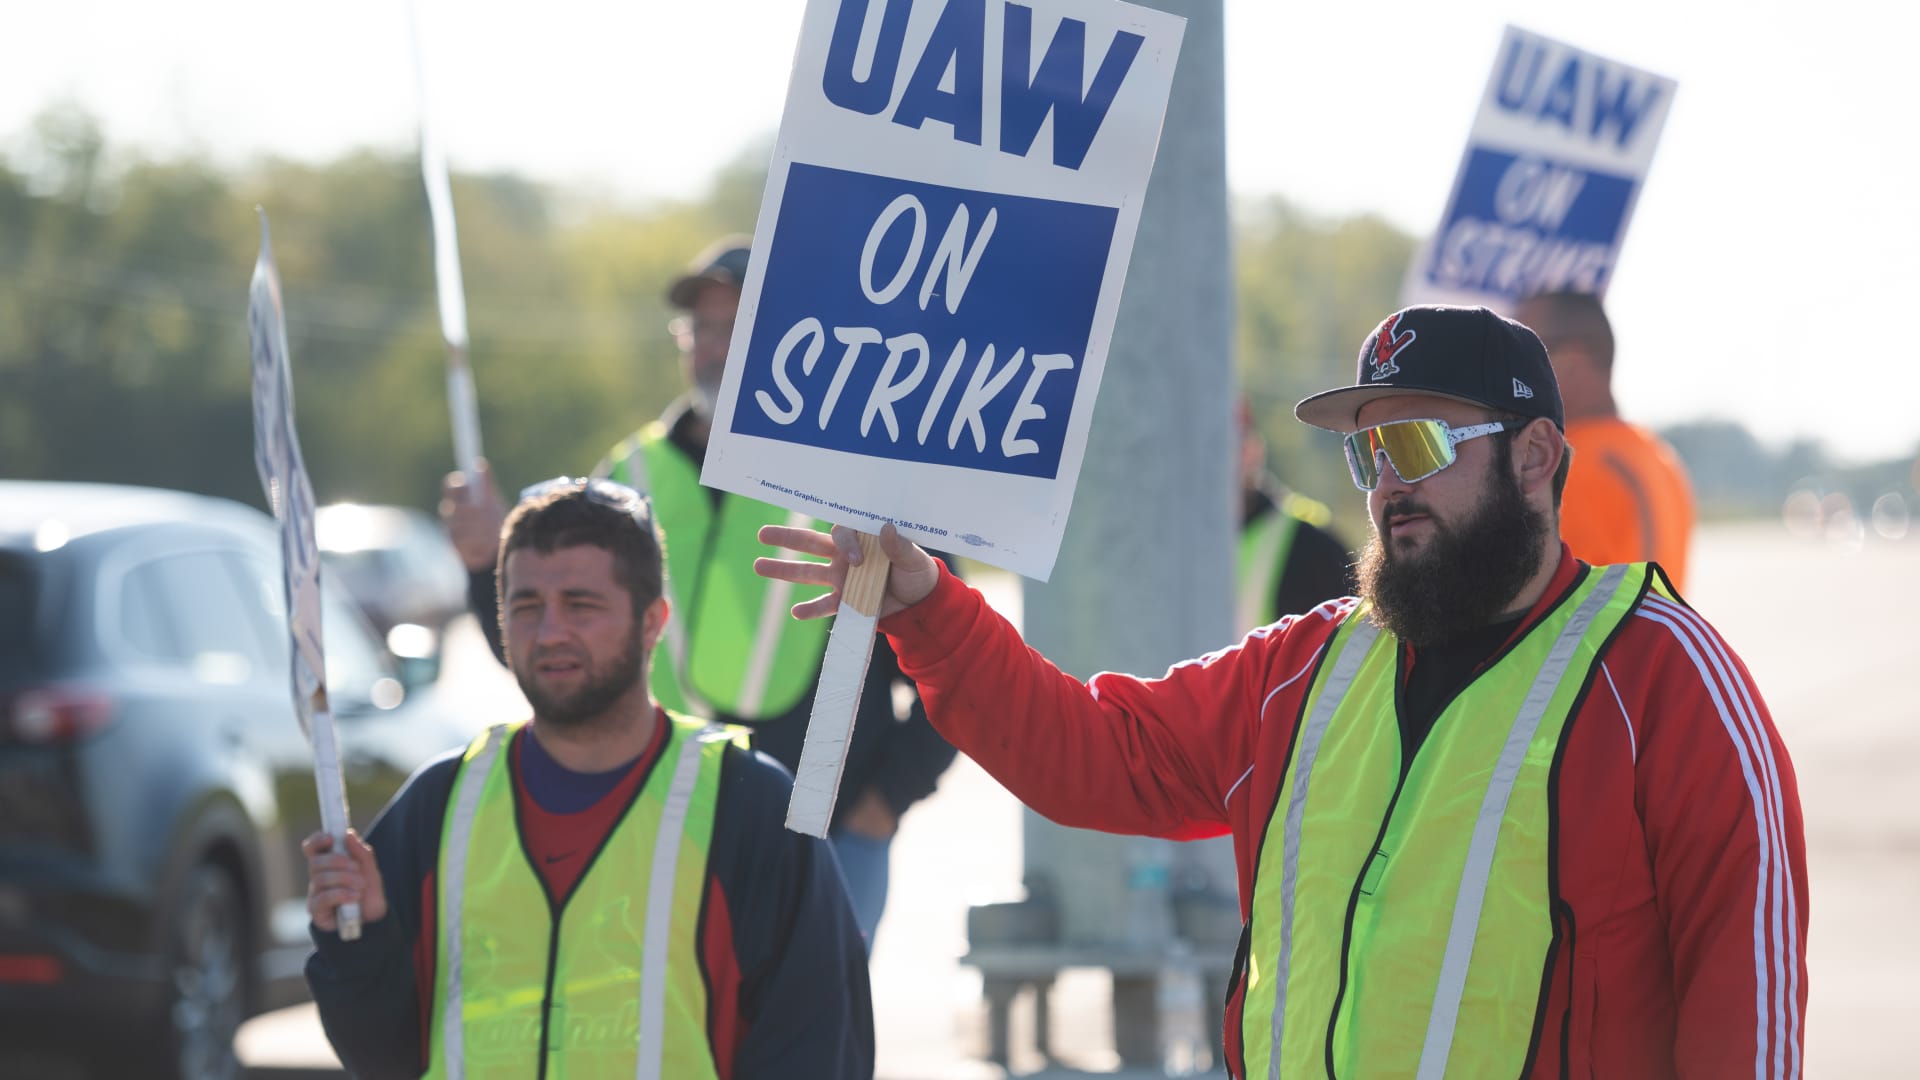 How Tesla is at the center of the UAW strikes